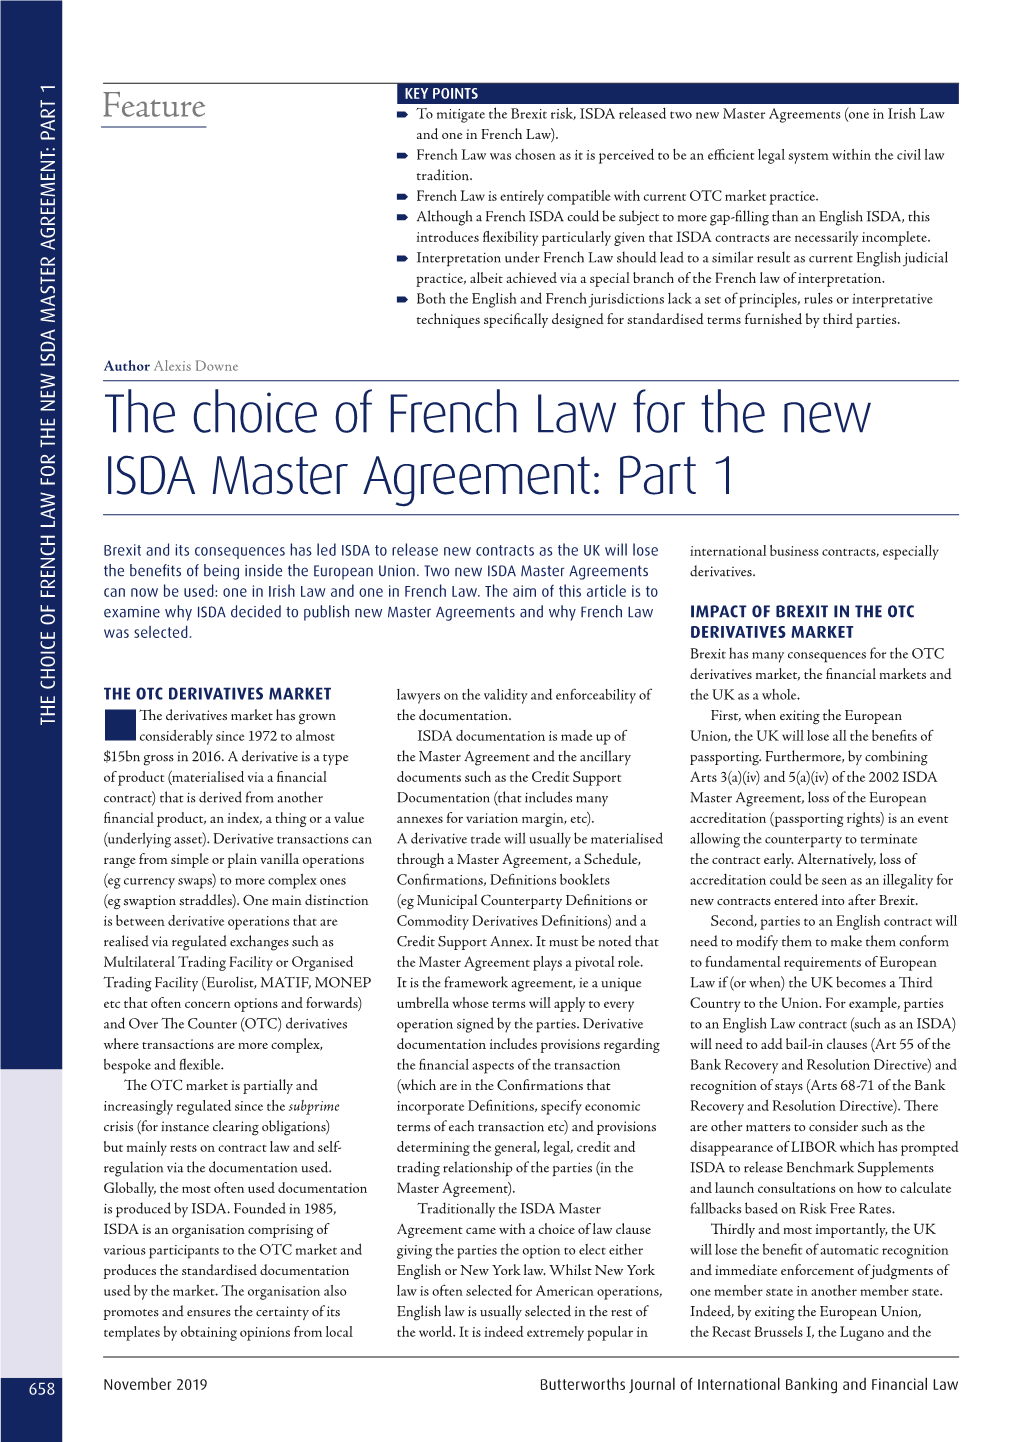 The Choice of French Law for the New ISDA Master Agreement: Part 1